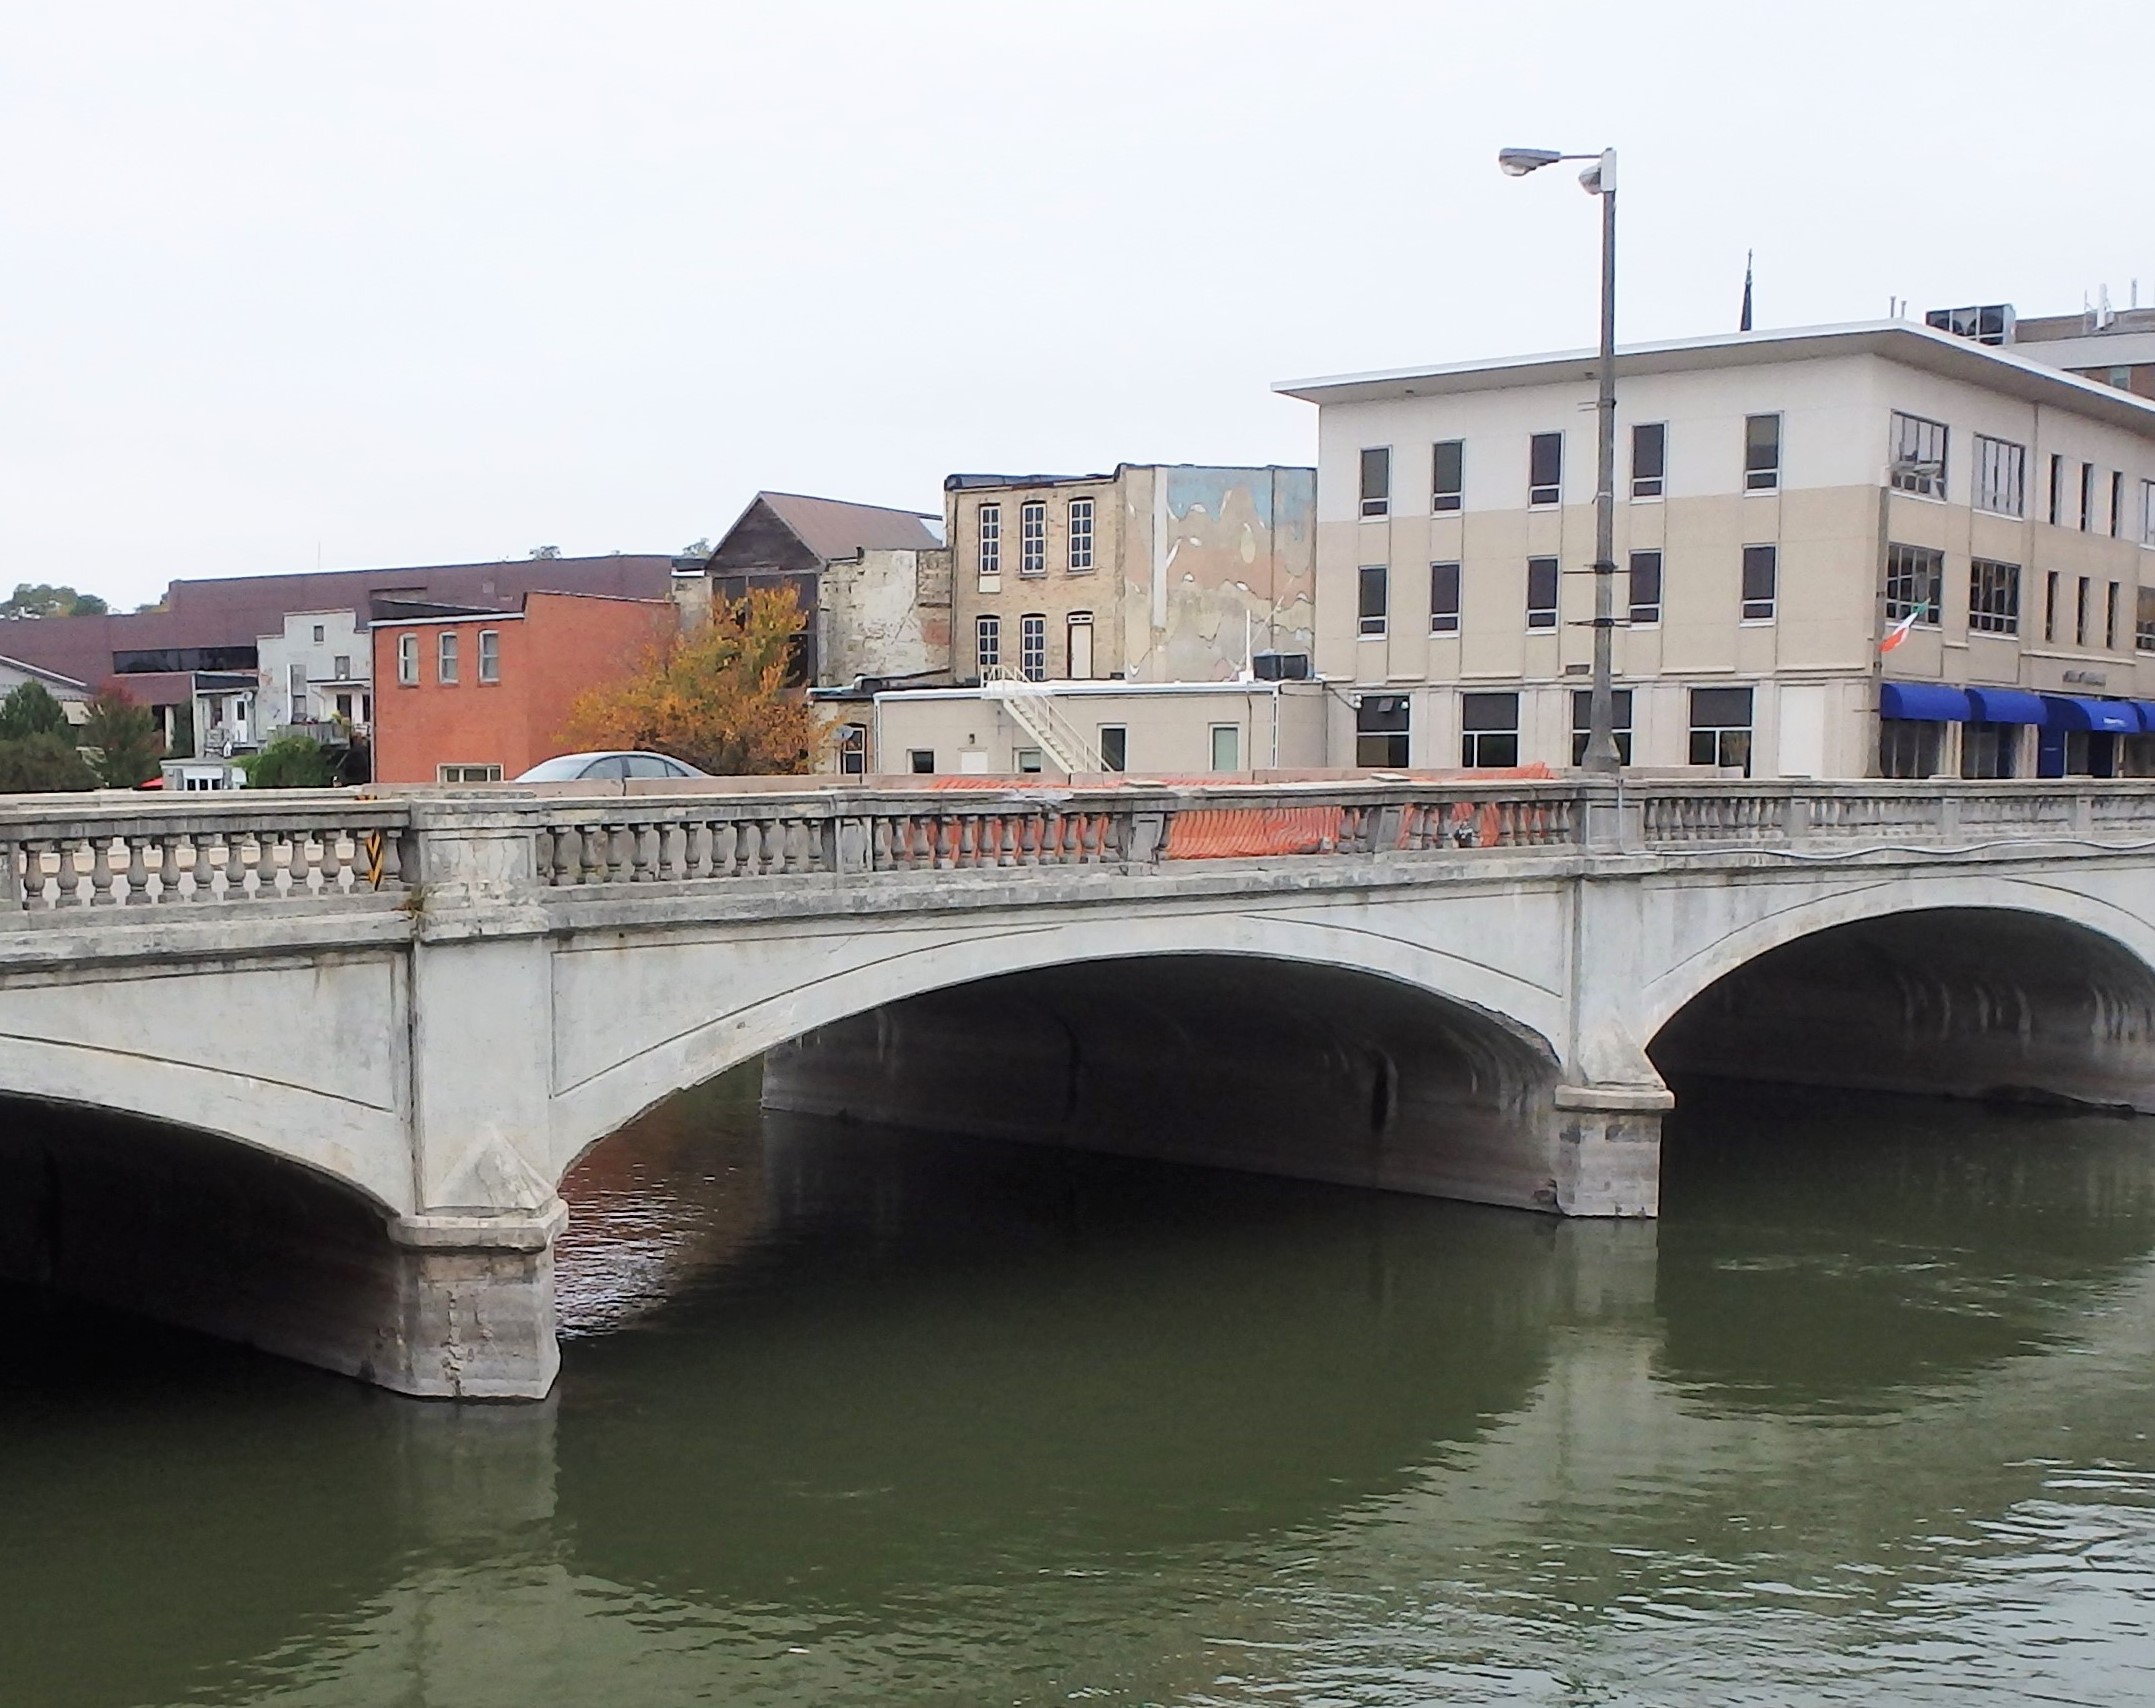 The former bridge across the Rock River in Janesville, Wisconsin, was severely deteriorating, with cracking and concrete falling into the river.